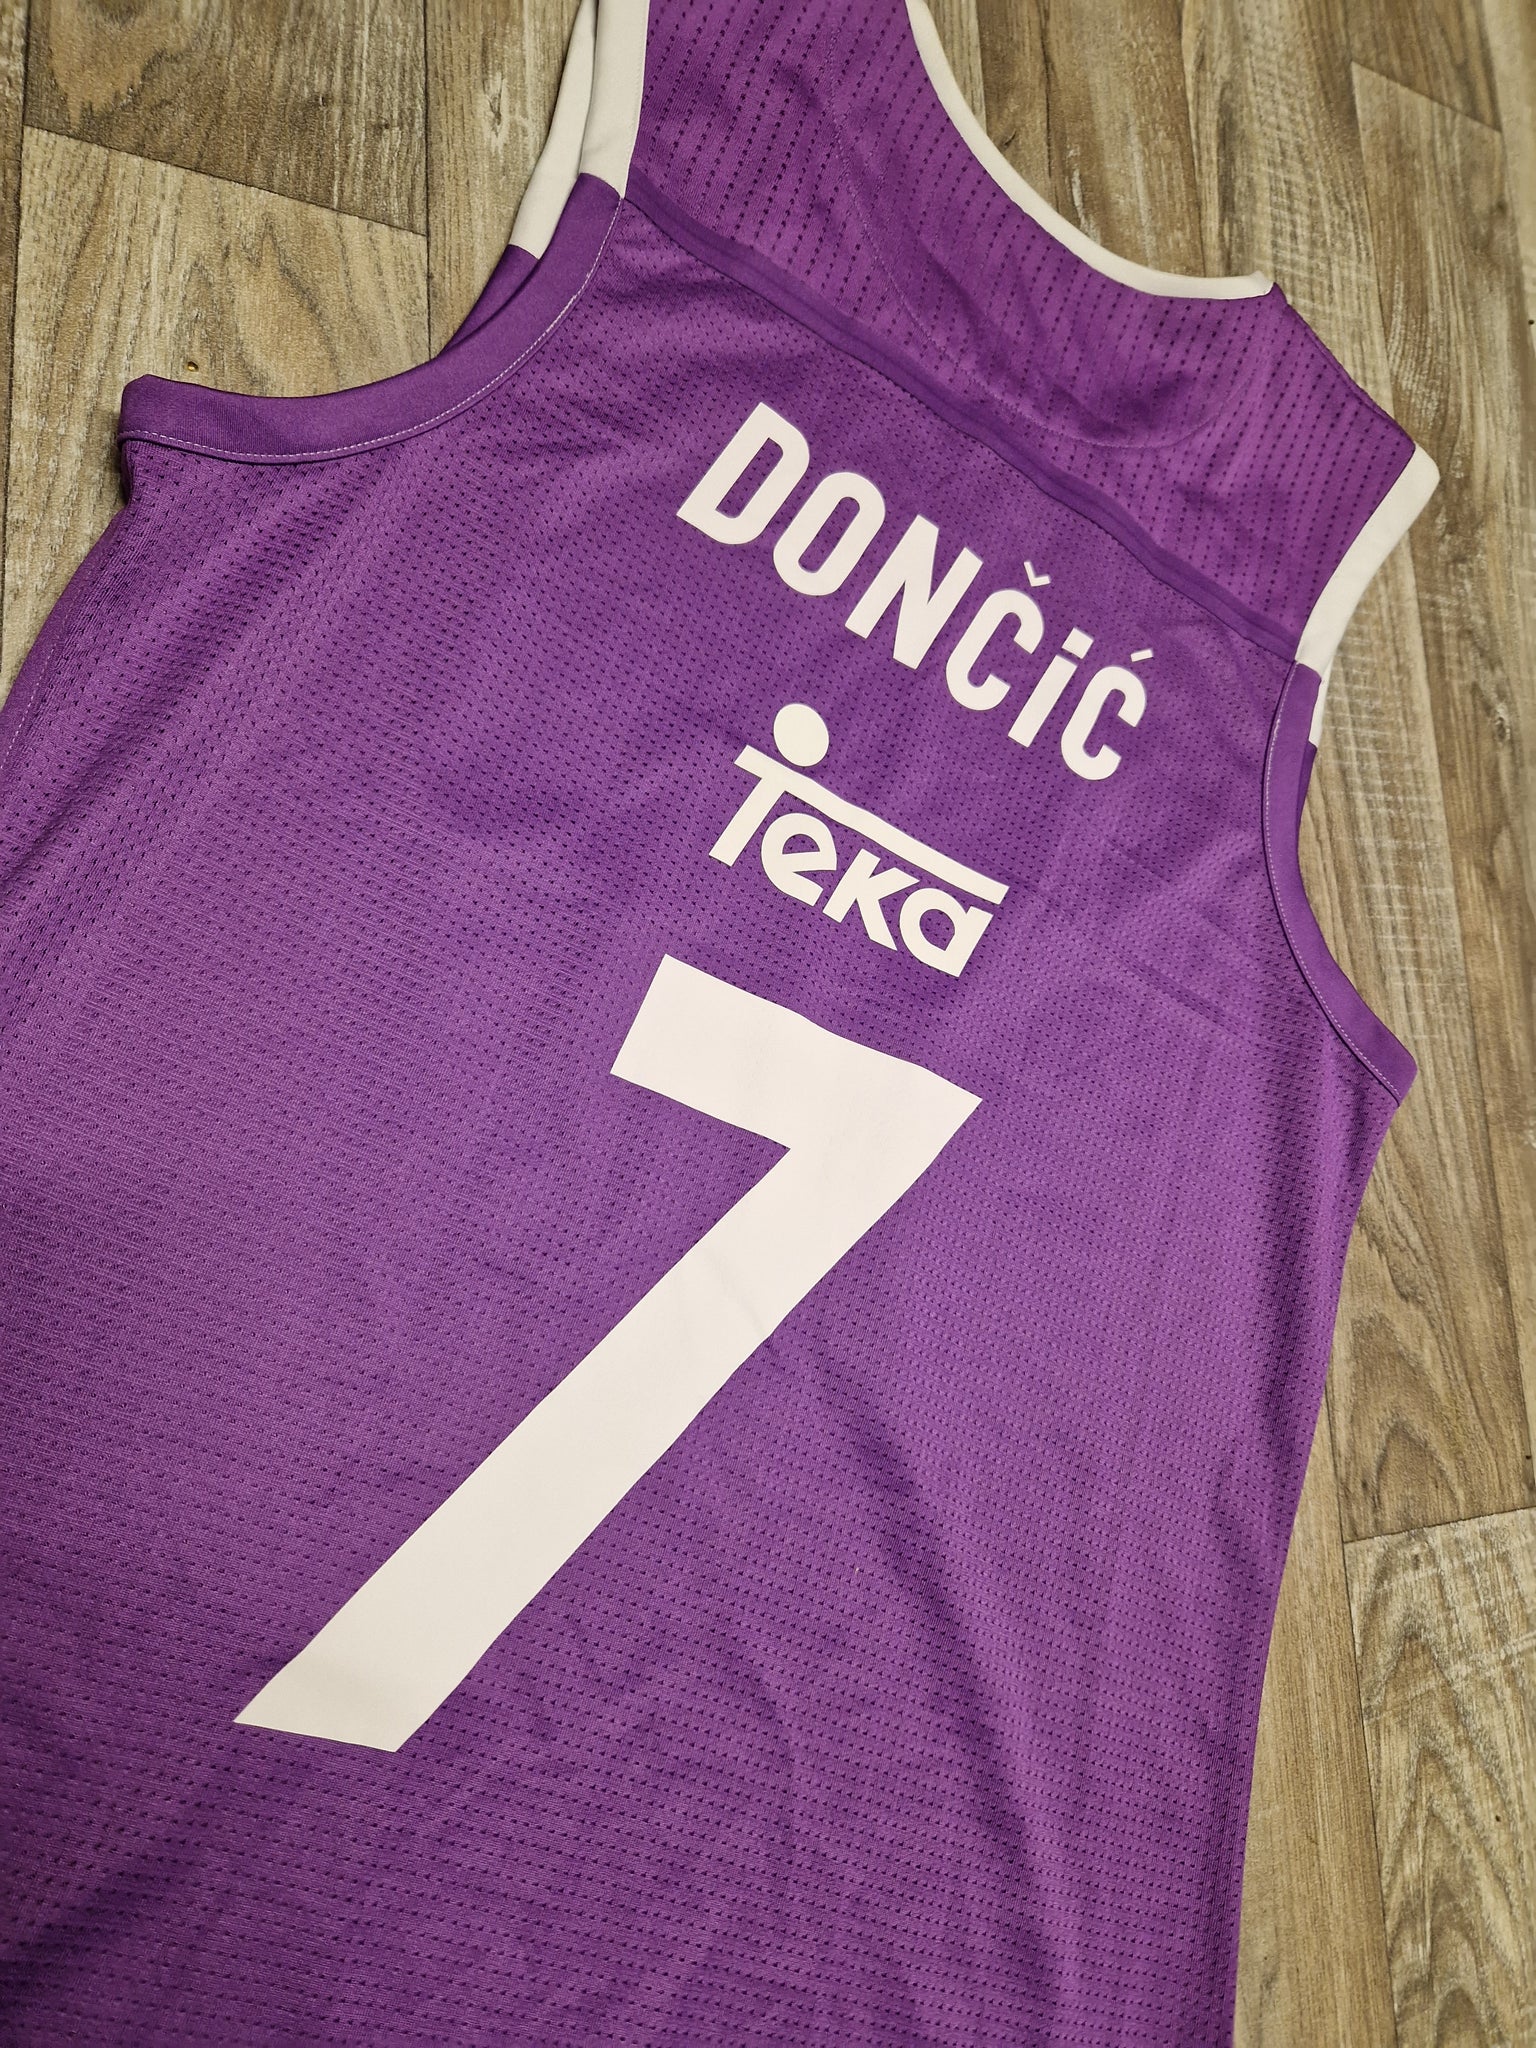 🏀 Luka Doncic Real Madrid Jersey Size Small – The Throwback Store 🏀